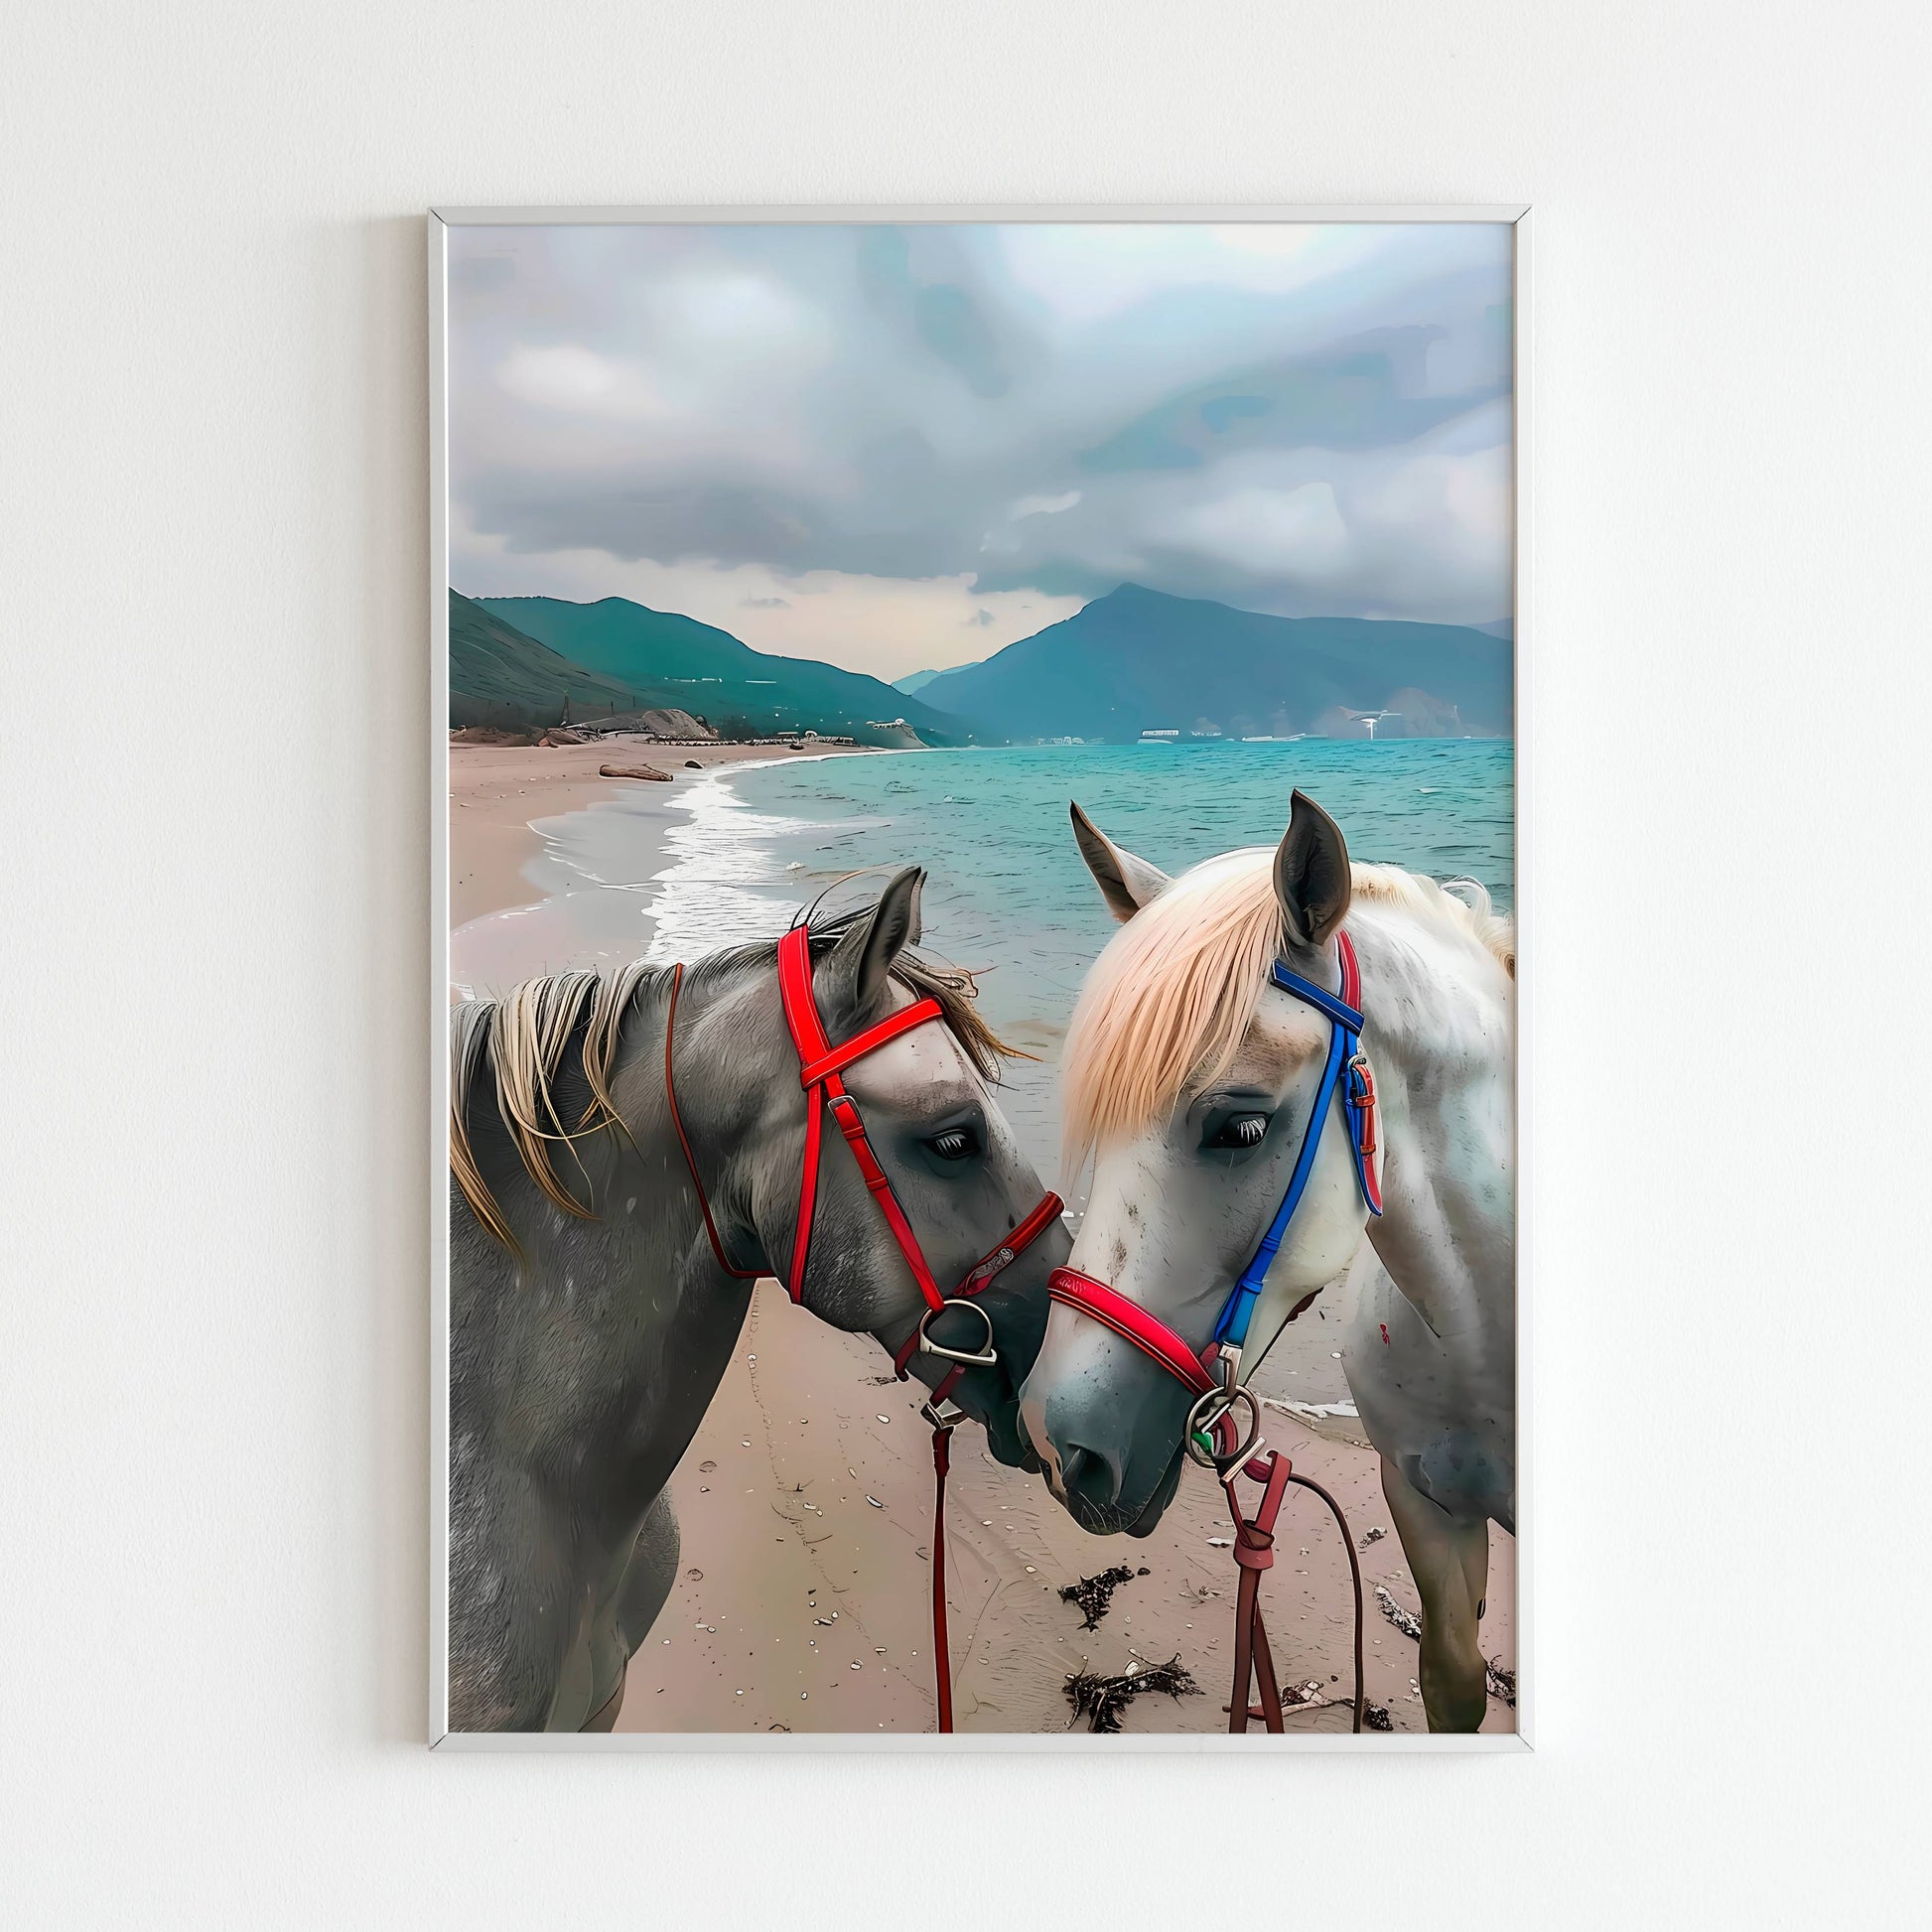 Capture the majesty of horses by the sea with this printable poster (physical or digital).